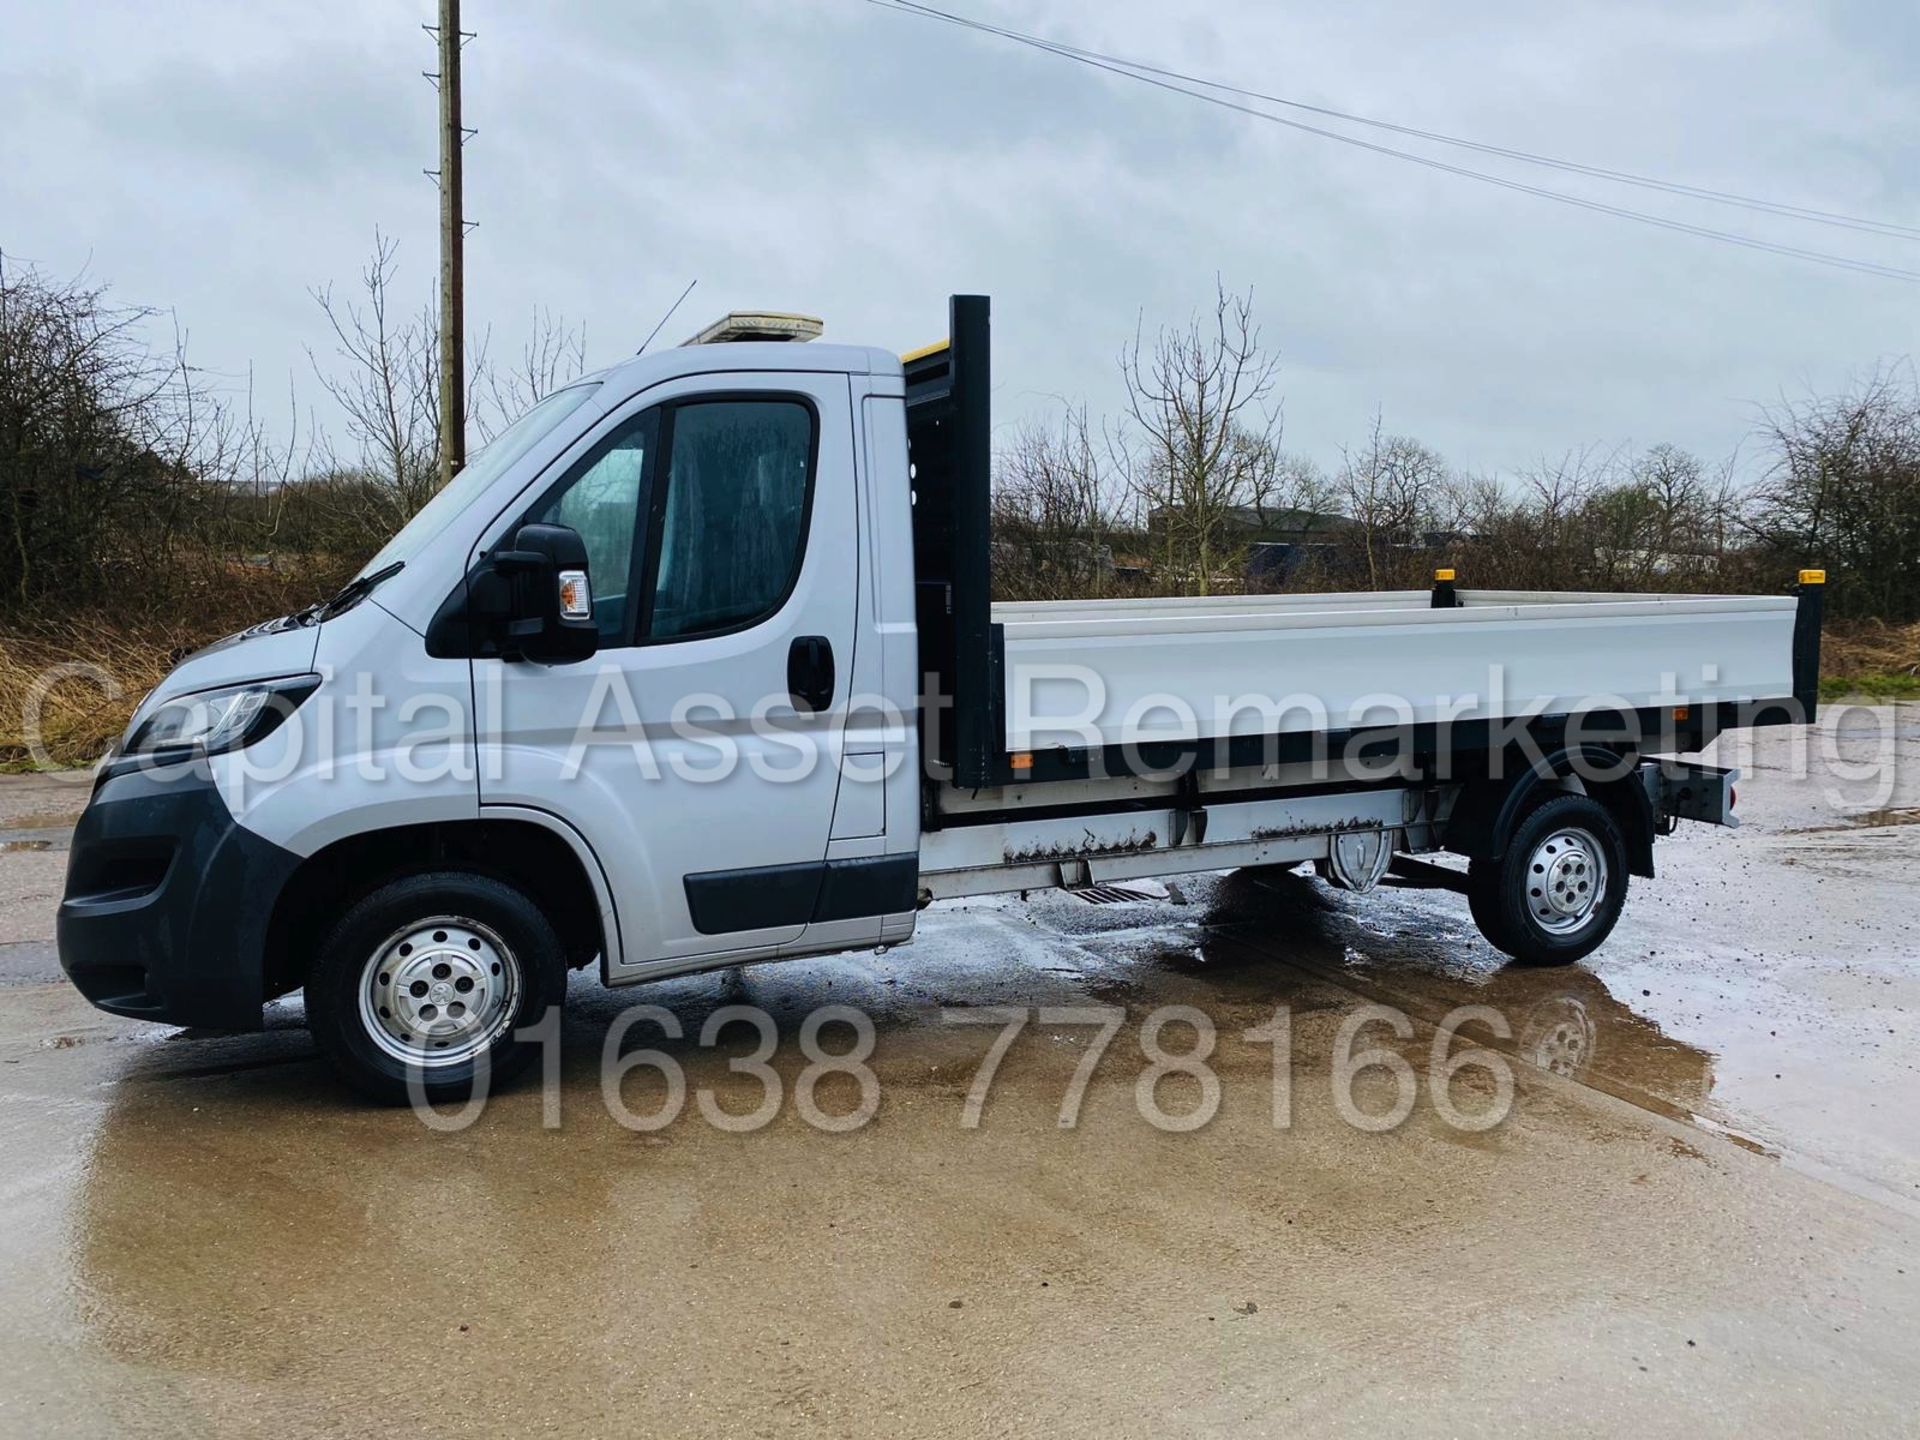 PEUGEOT BOXER 335 *LWB - ALLOY DROPSIDE TRUCK* (2016 MODEL) '2.2 HDI - 130 BHP - 6 SPEED' (3500 KG) - Image 4 of 32